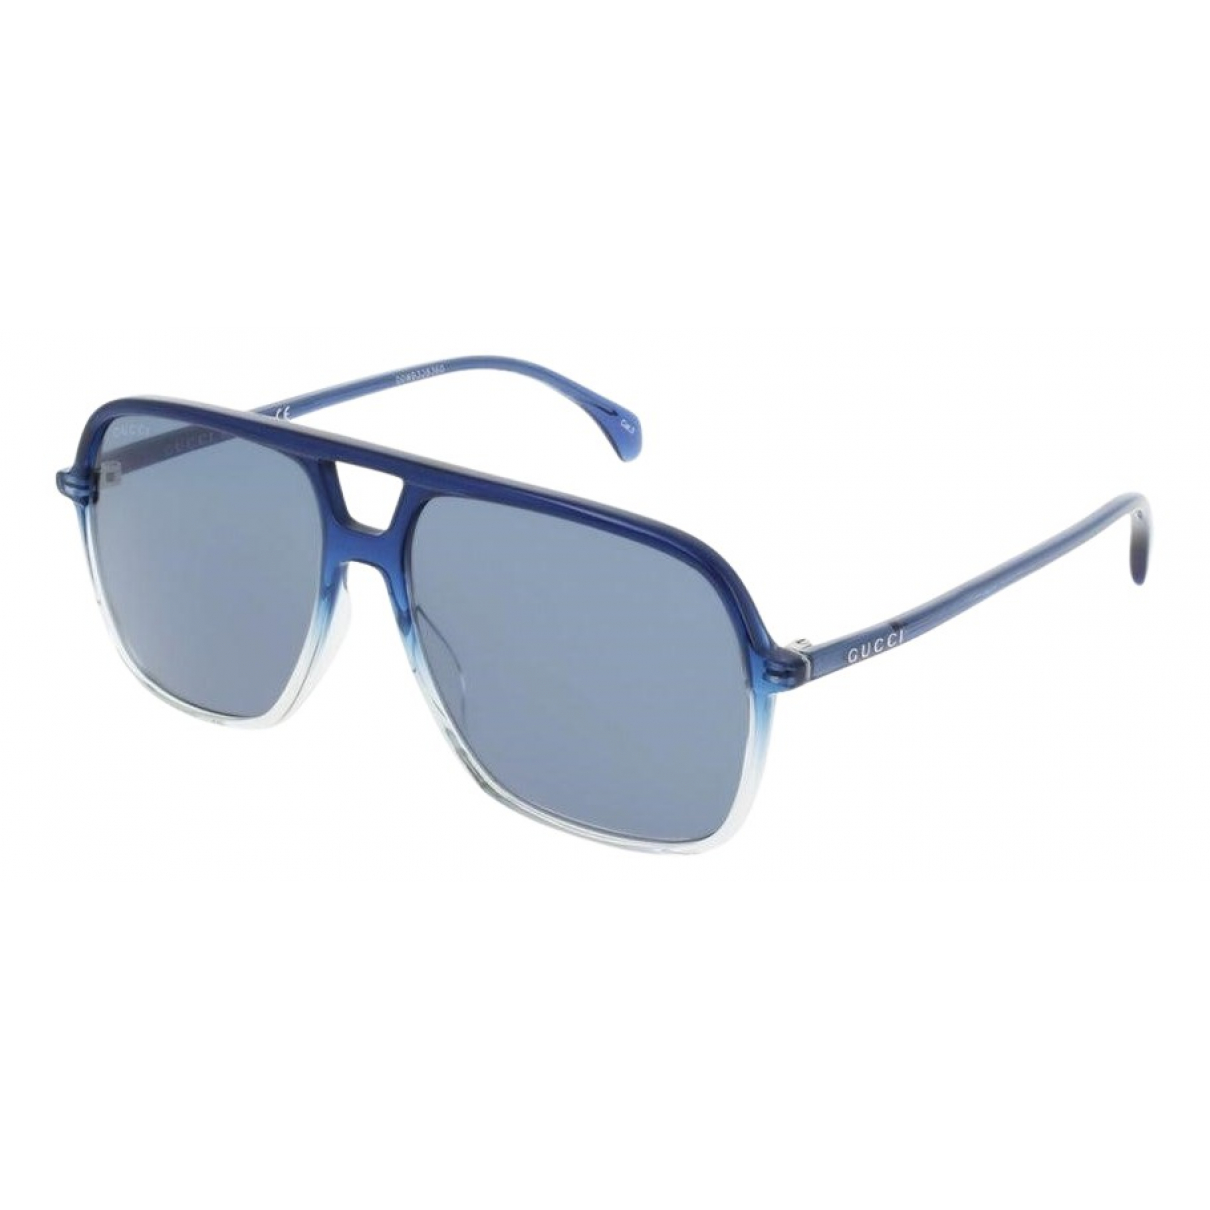 55% OFF 70% OFF Outlet Aviator sunglasses